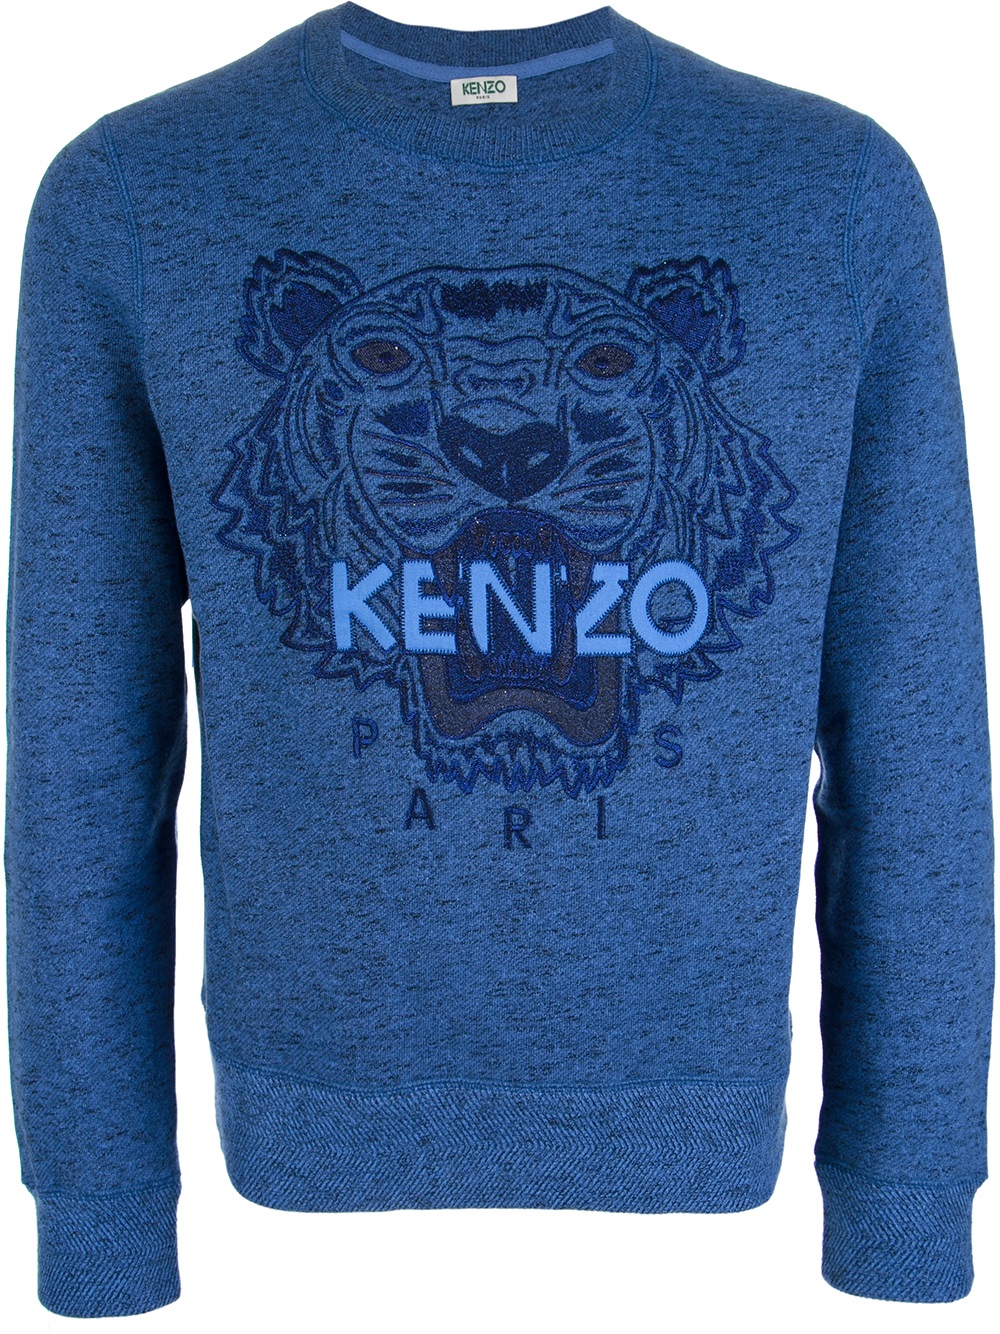 KENZO Embroidered Tiger Sweater in Blue 